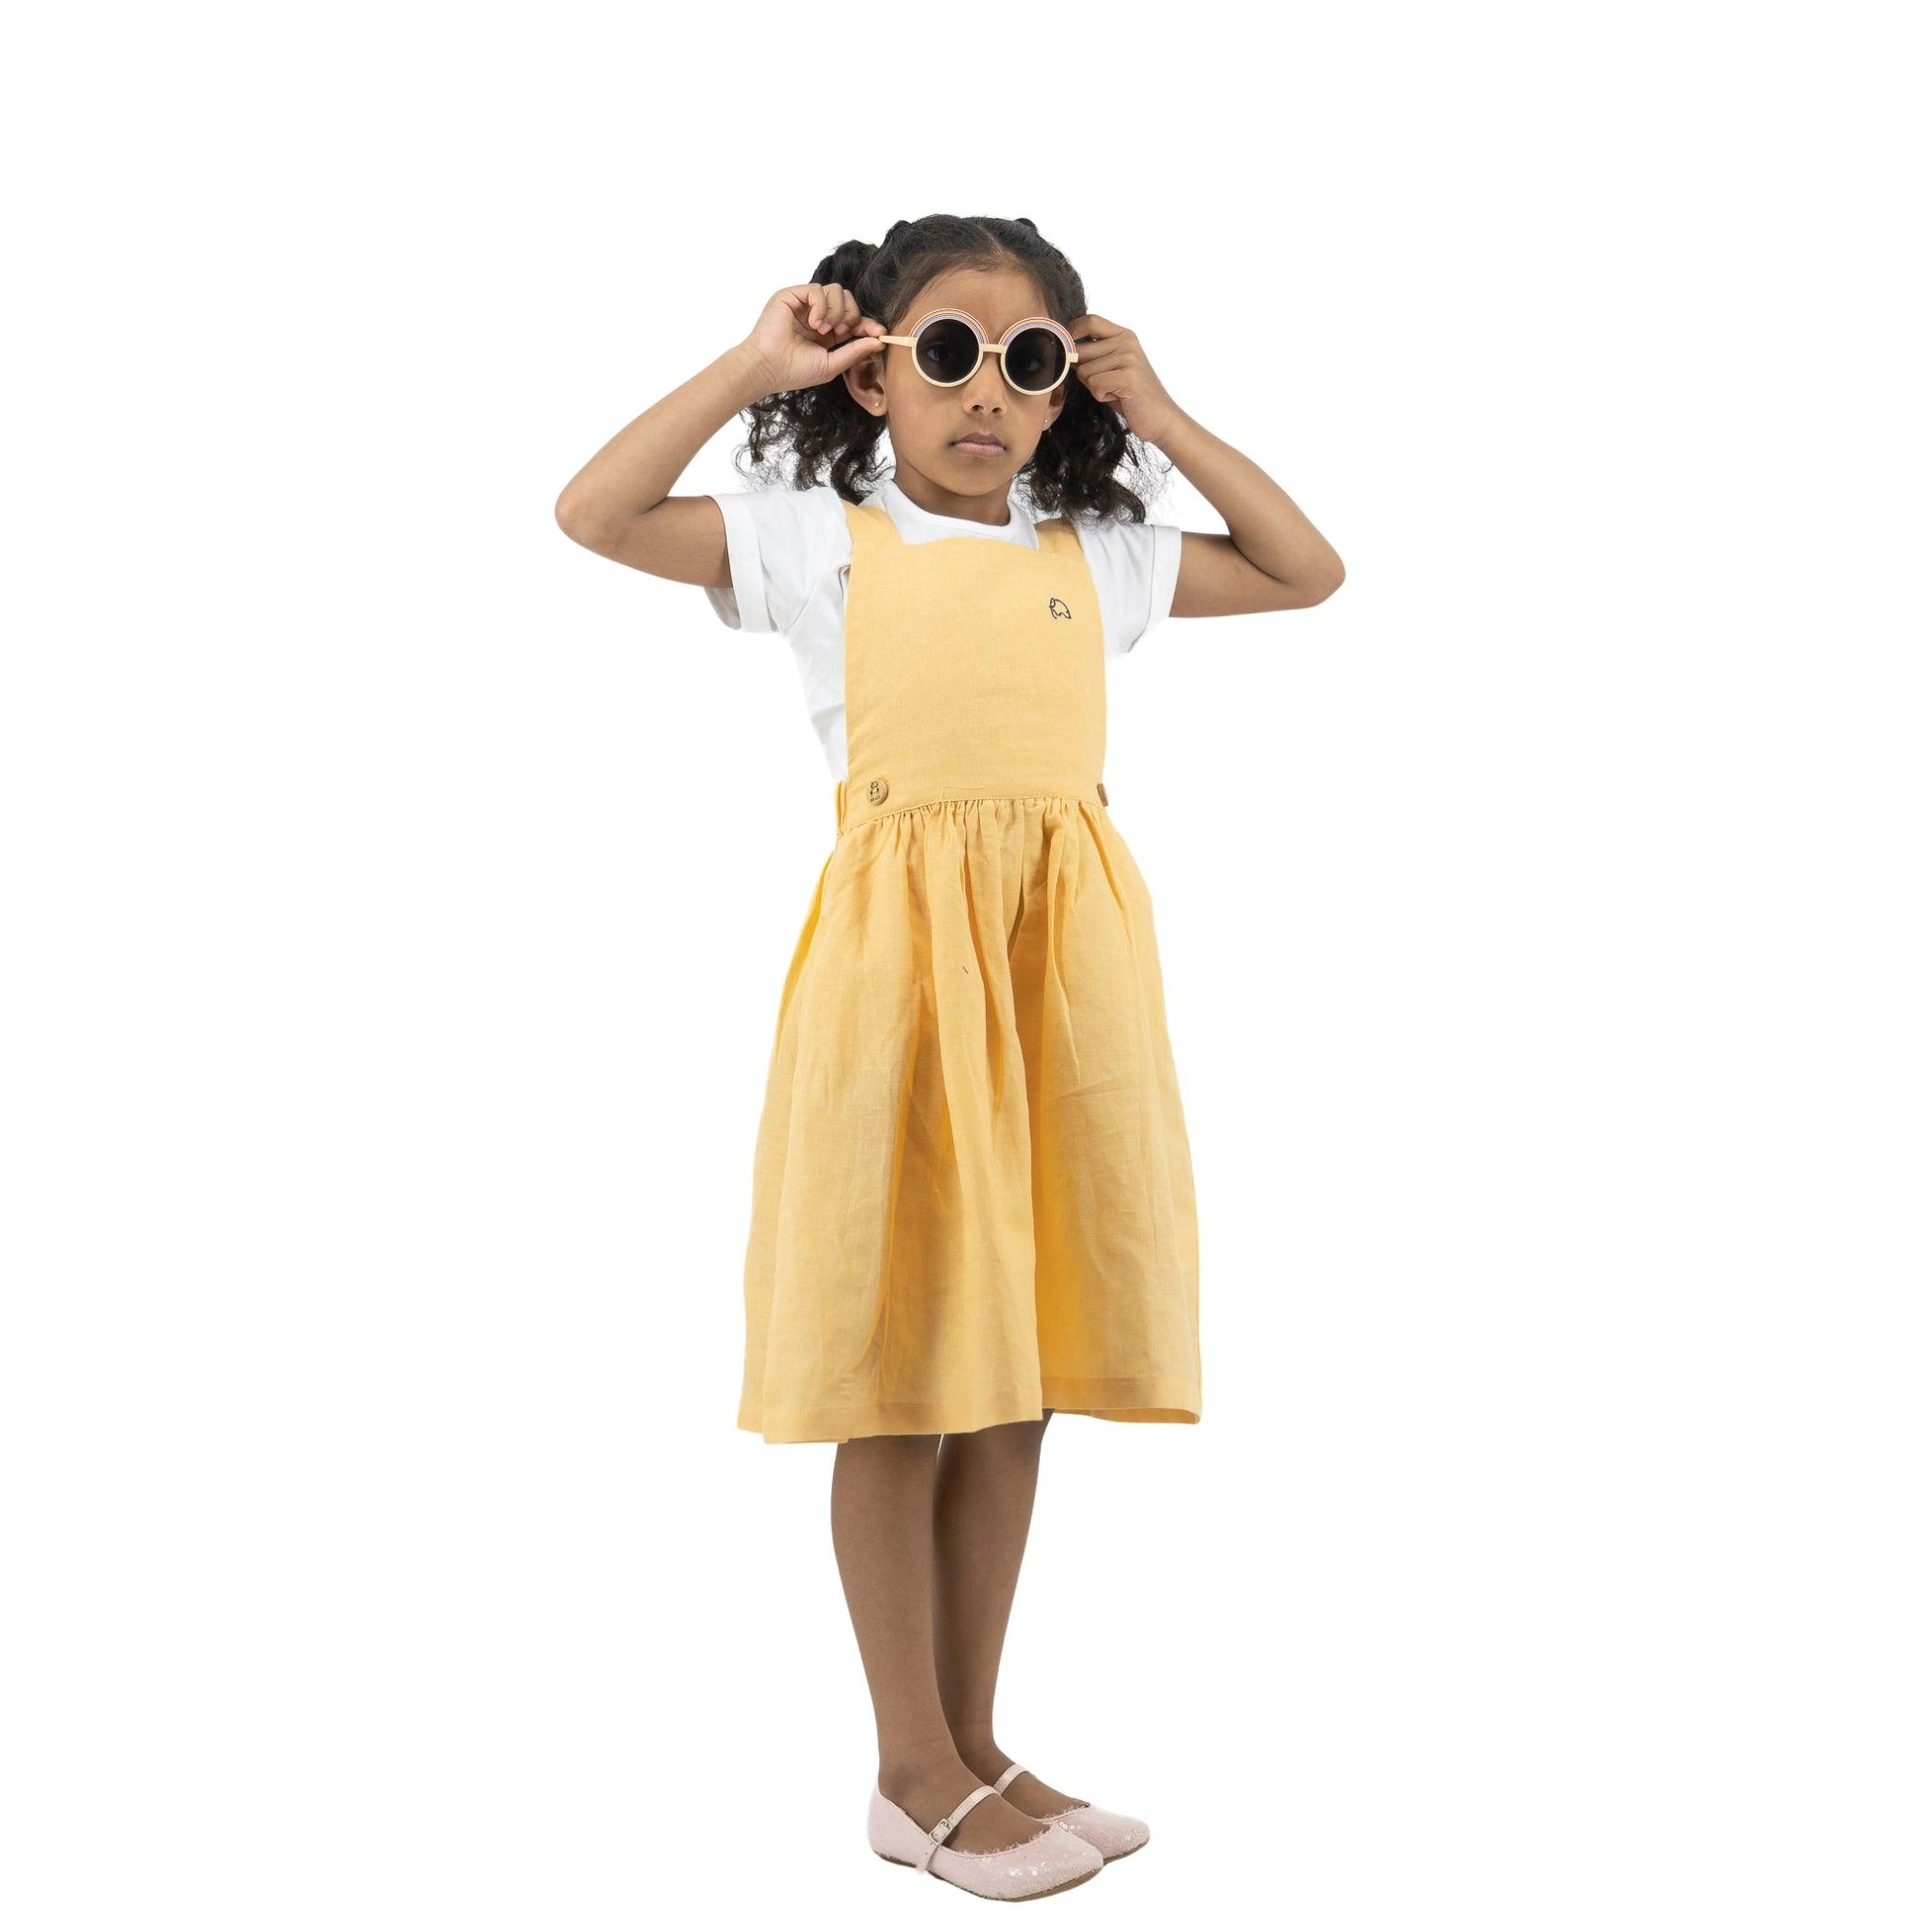 Young girl in a Karee Golden Fleece Linen Pinafore dress and white shirt adjusting oversized sunglasses, standing against a white background.